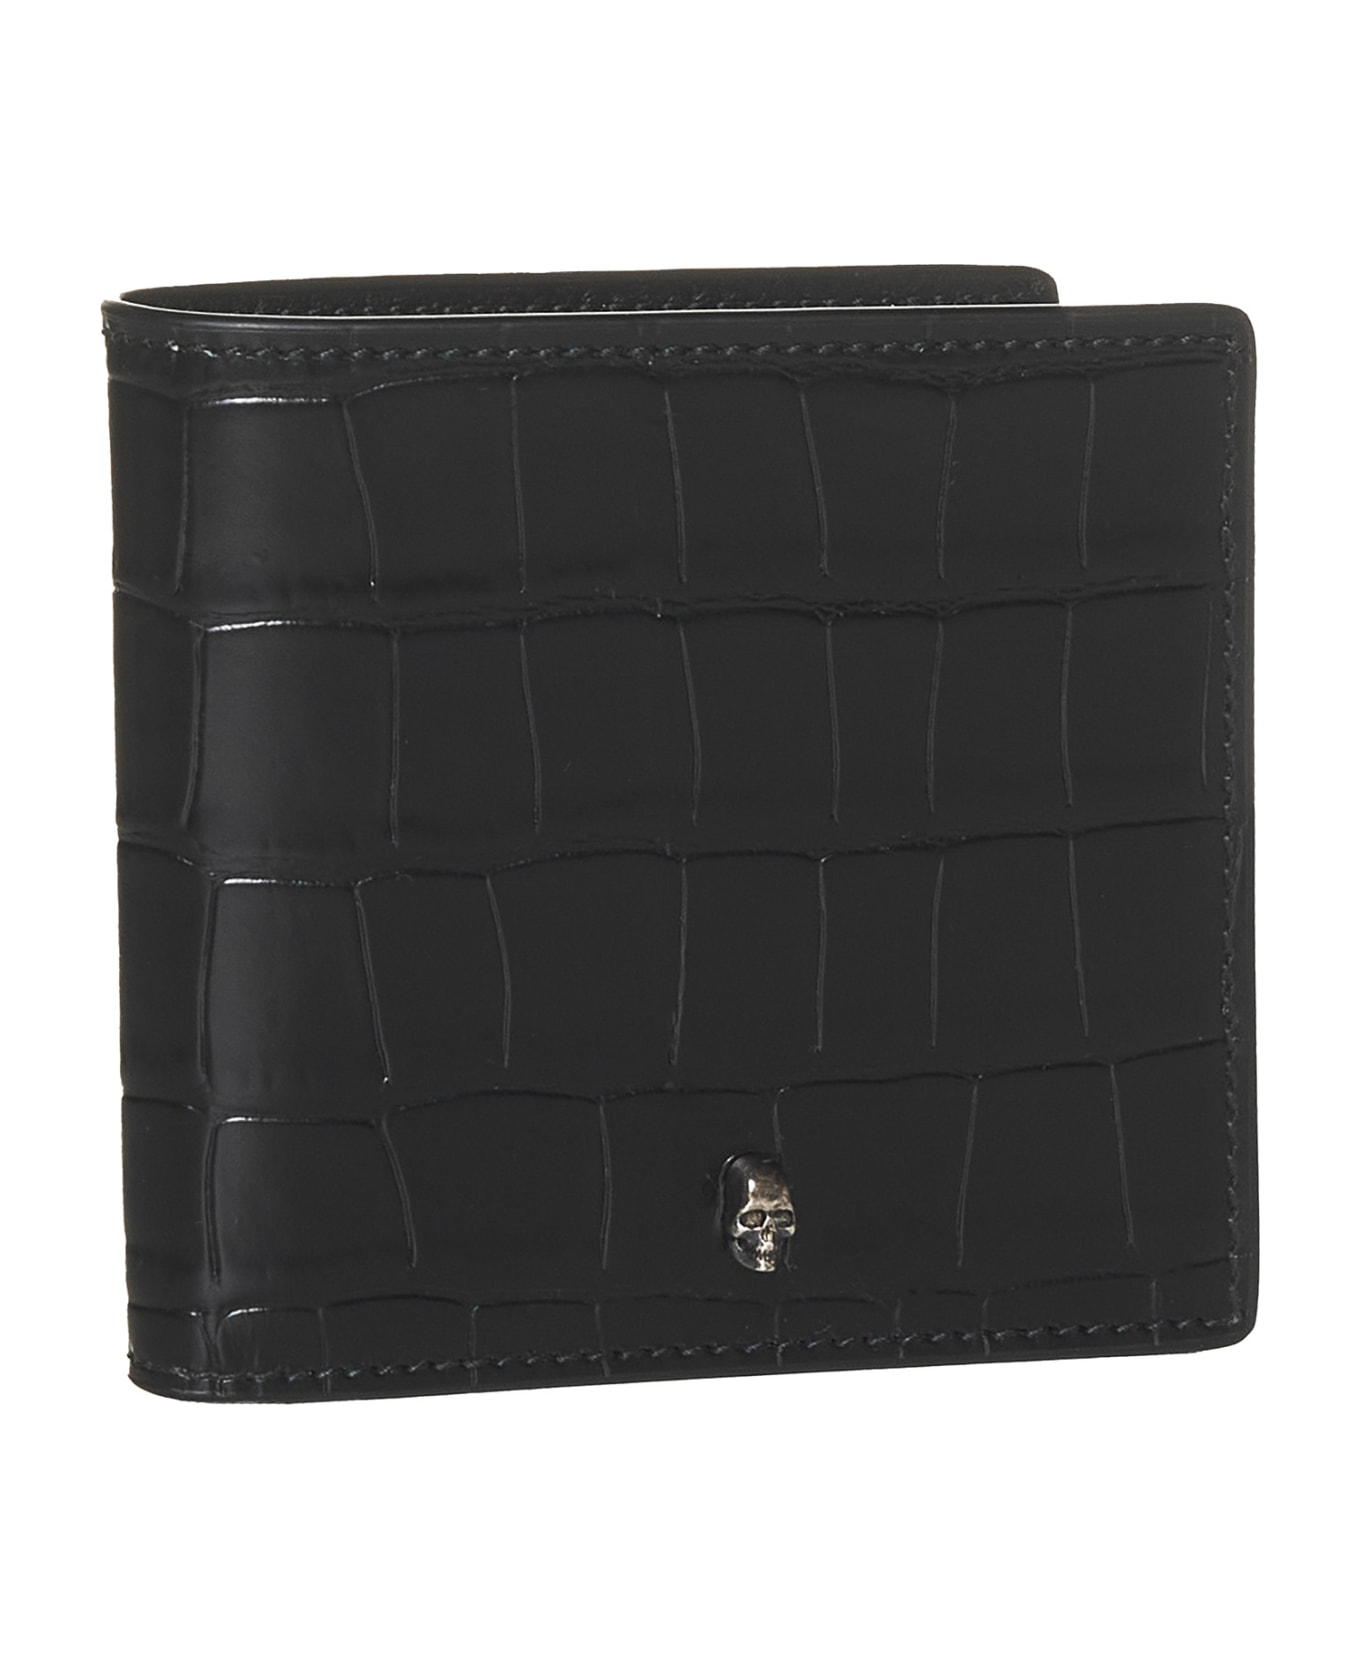 Alexander McQueen Bi-fold Wallet With Mini Skull Patch In Croco Embossed Leather - Nero 財布